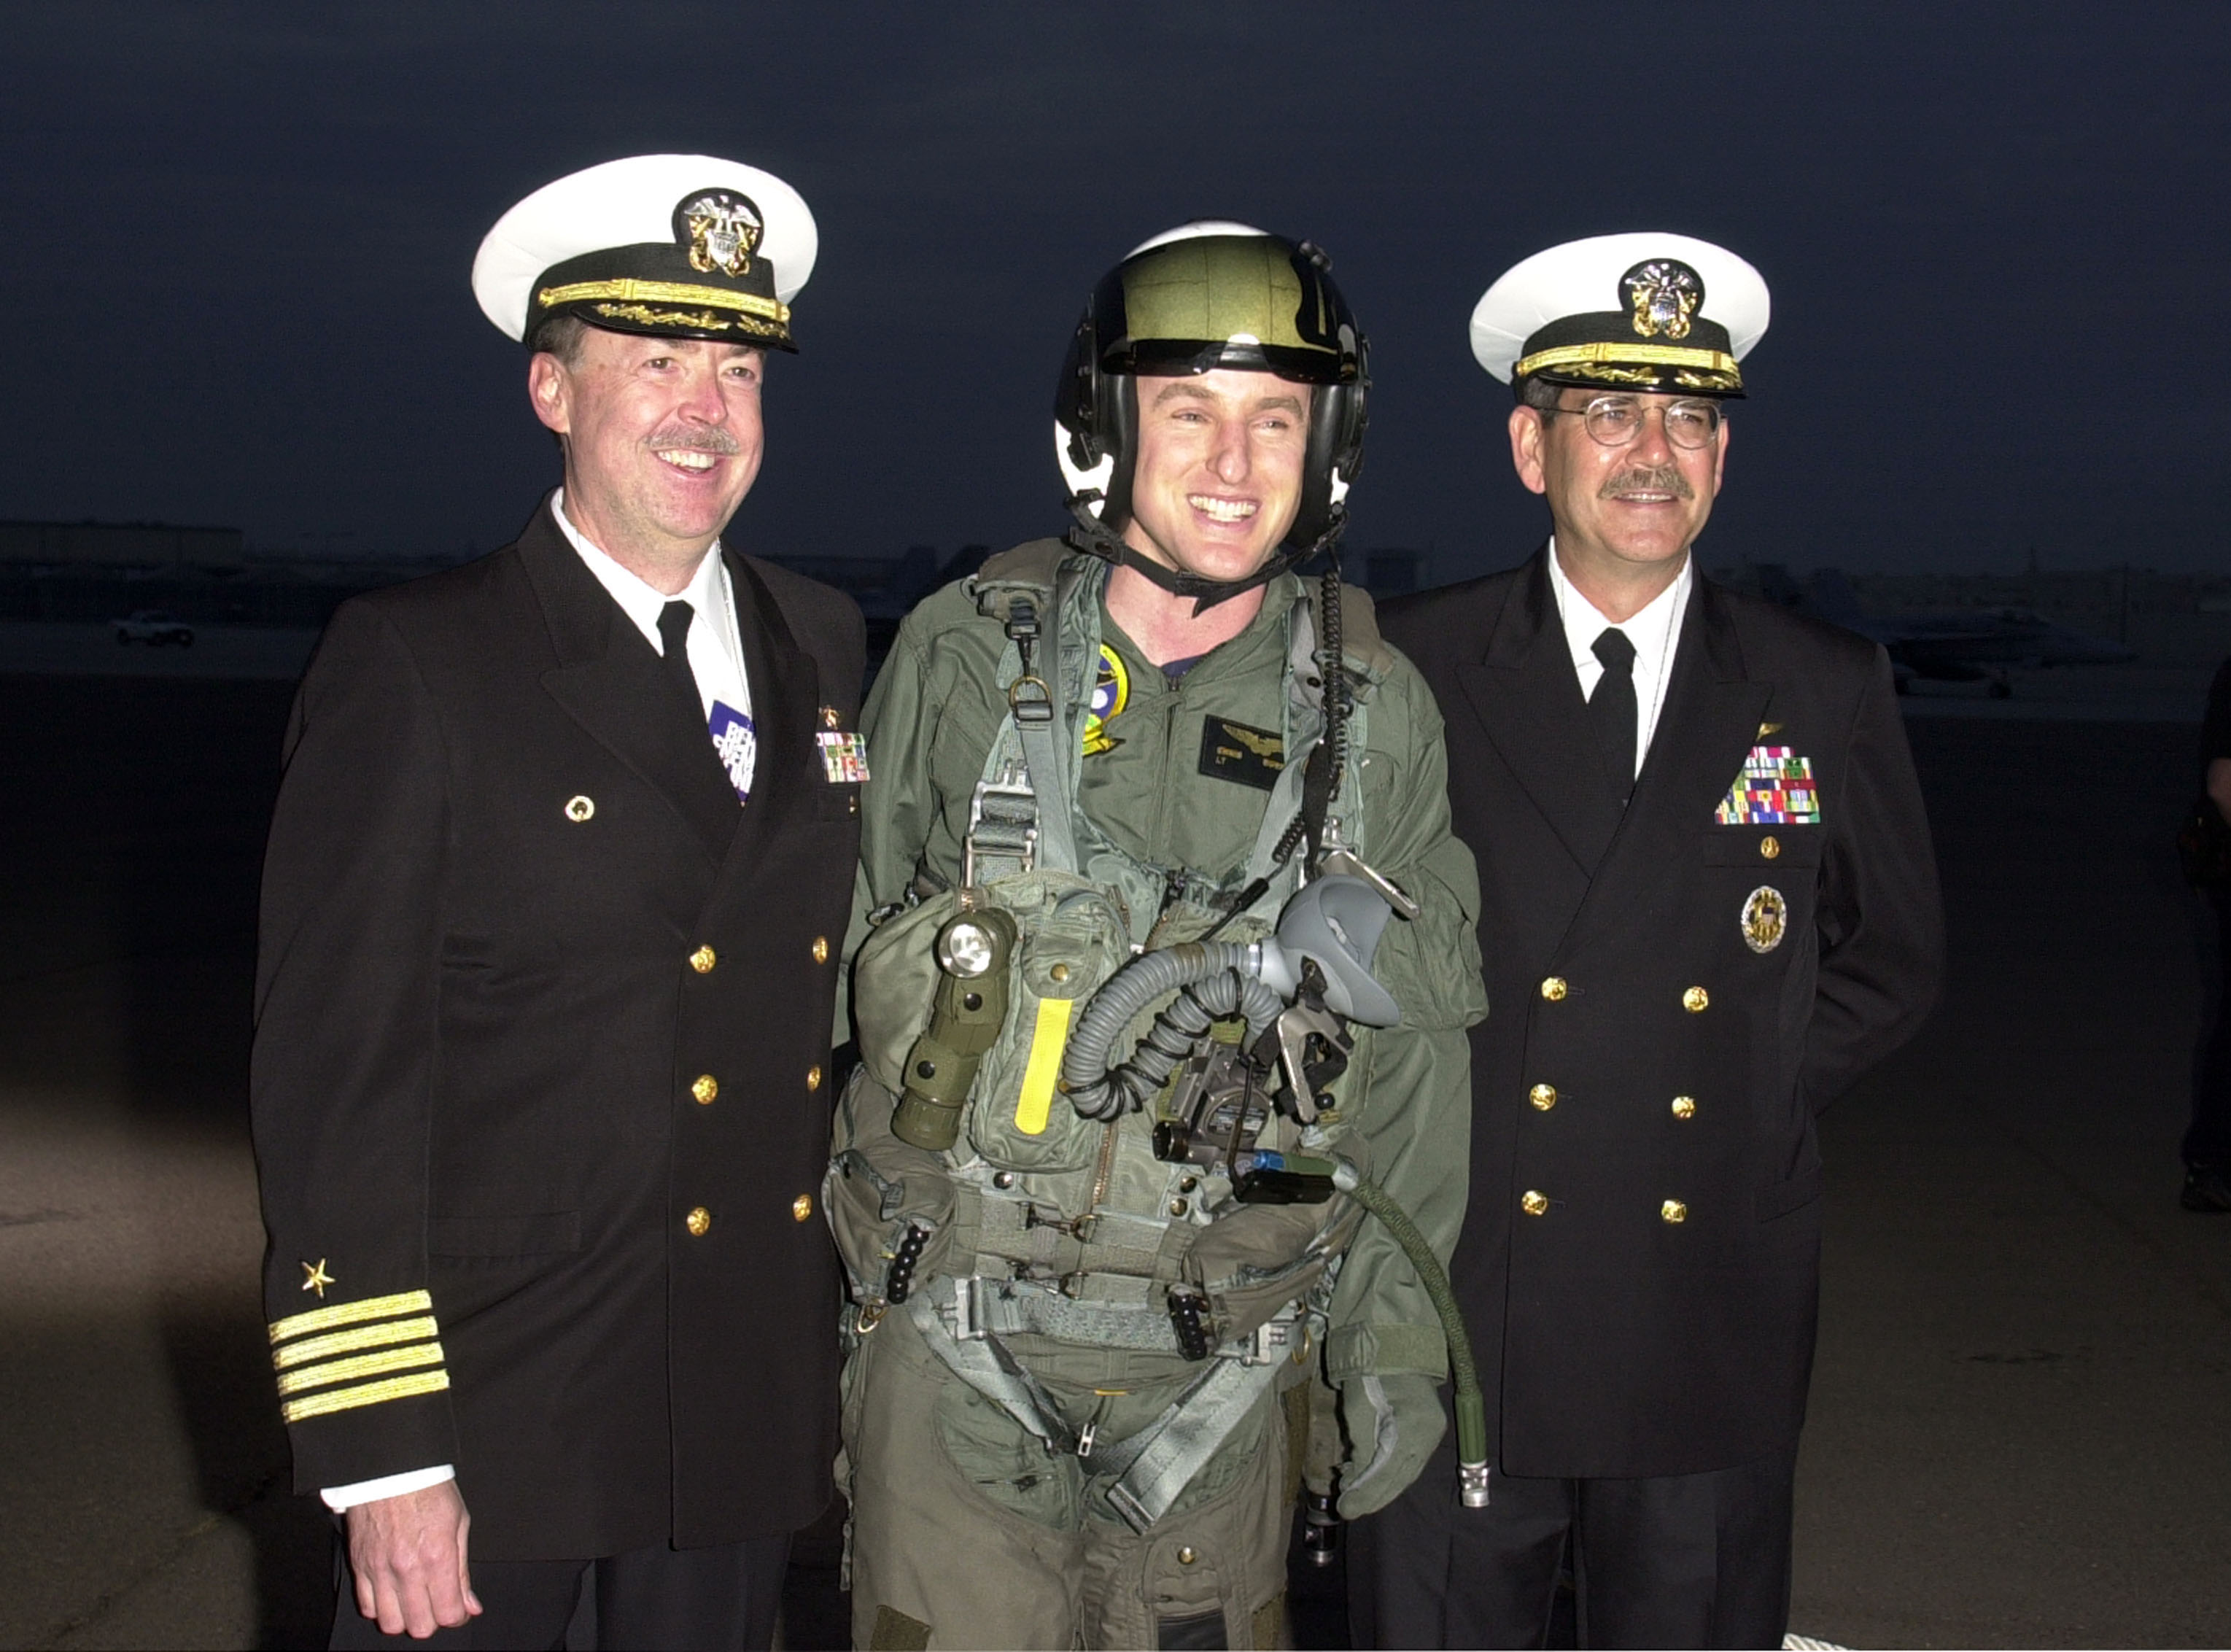 Captain David R. Landon, Owen Wilson, and Commander Mike Urquhart attend the "Behind Enemy Lines" Navy Premiere in 2001 in Coronado, California. | Source: Getty Images